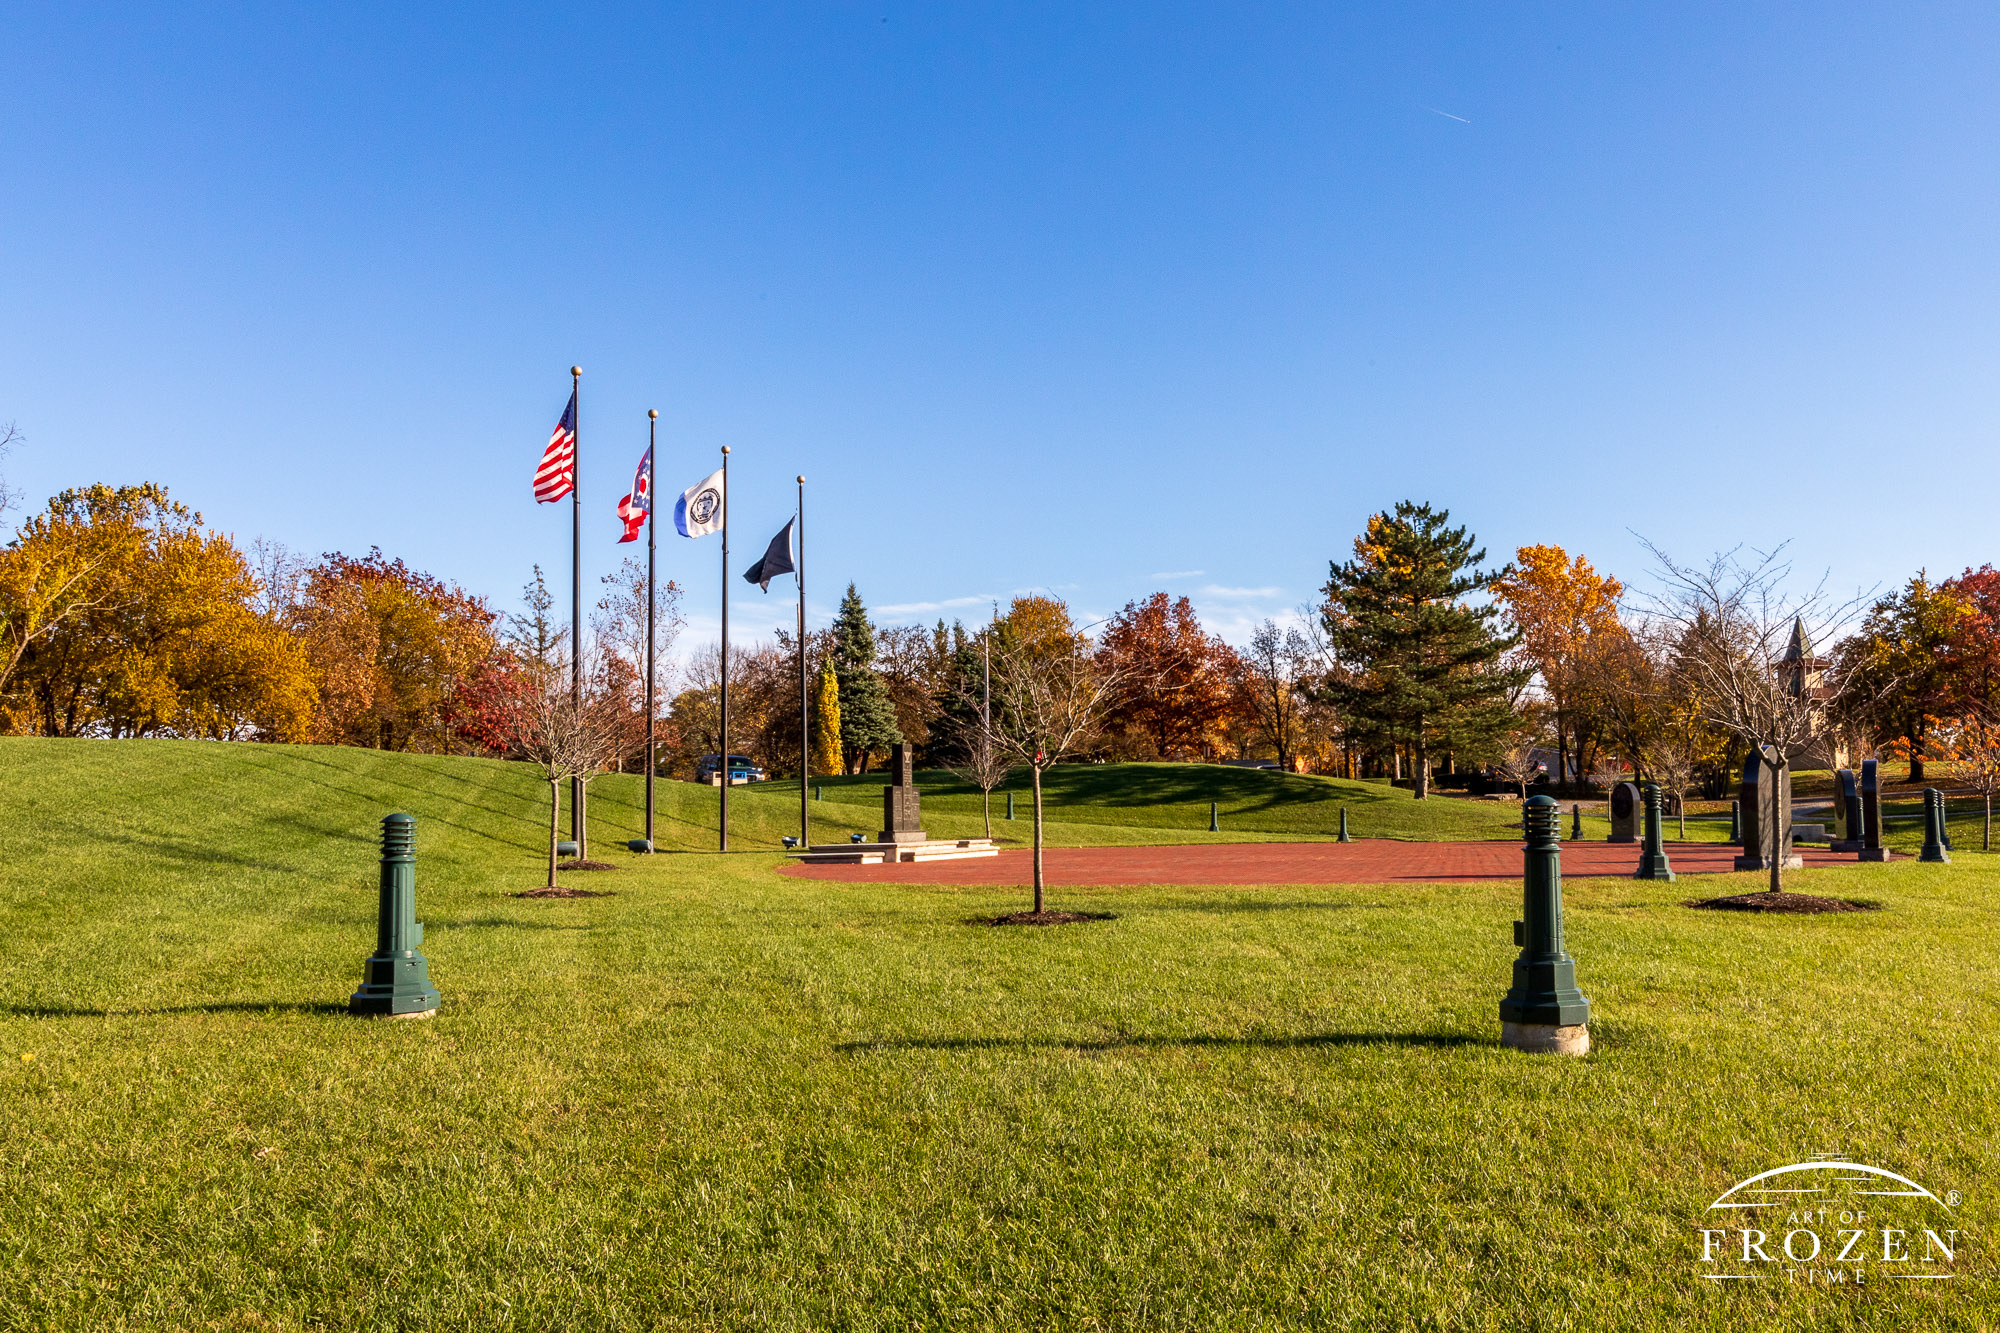 An evening image of the Centerville Ohio Veterans Memorial where the golden light enriches the autumn colors and a gentle wind lifts the flags from the pole.